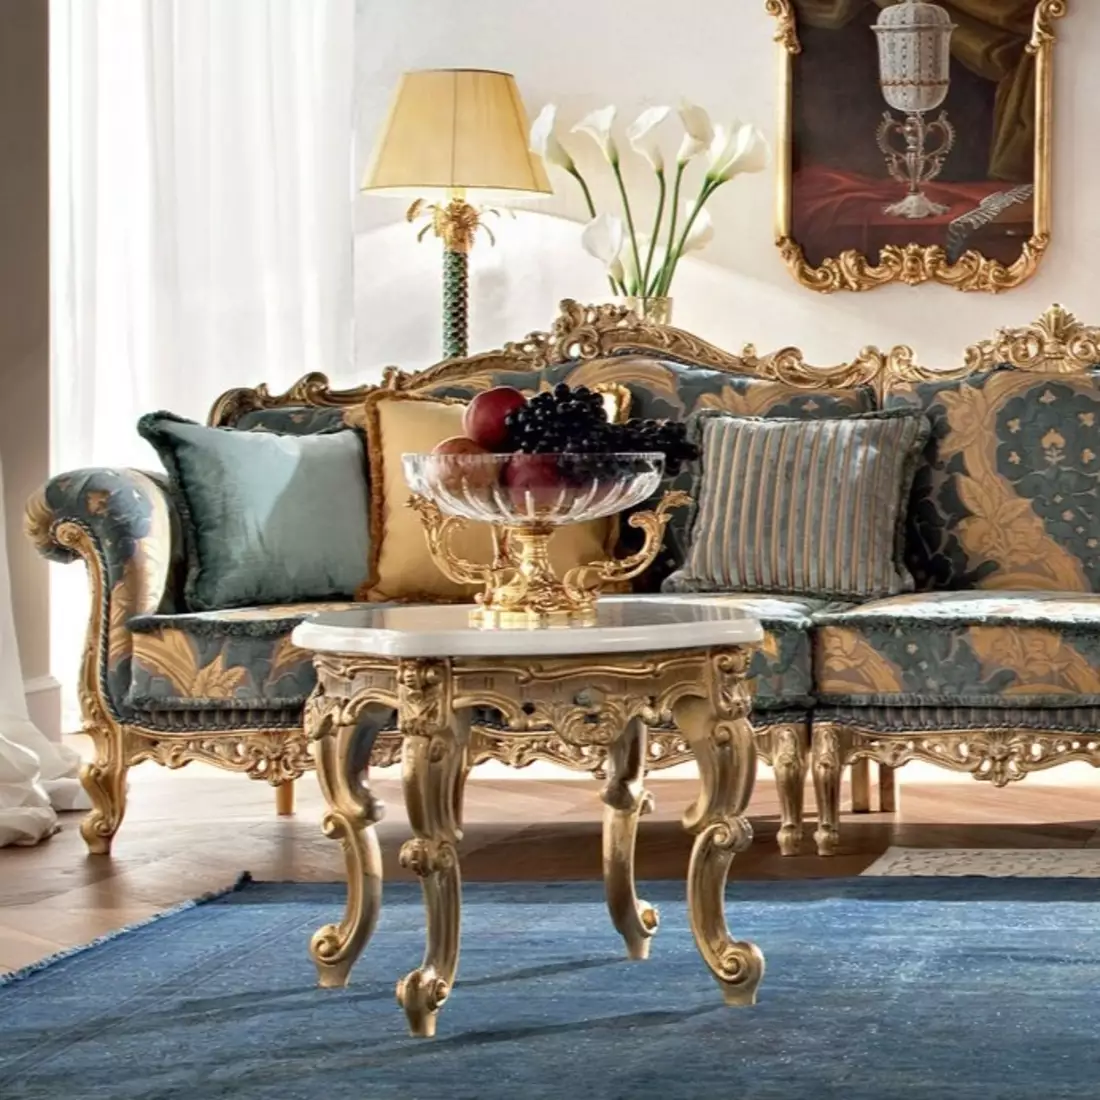 Venetian-classic-style-sofa-with-soft-upholstery-Casanova-collection-Modenese-Gastone